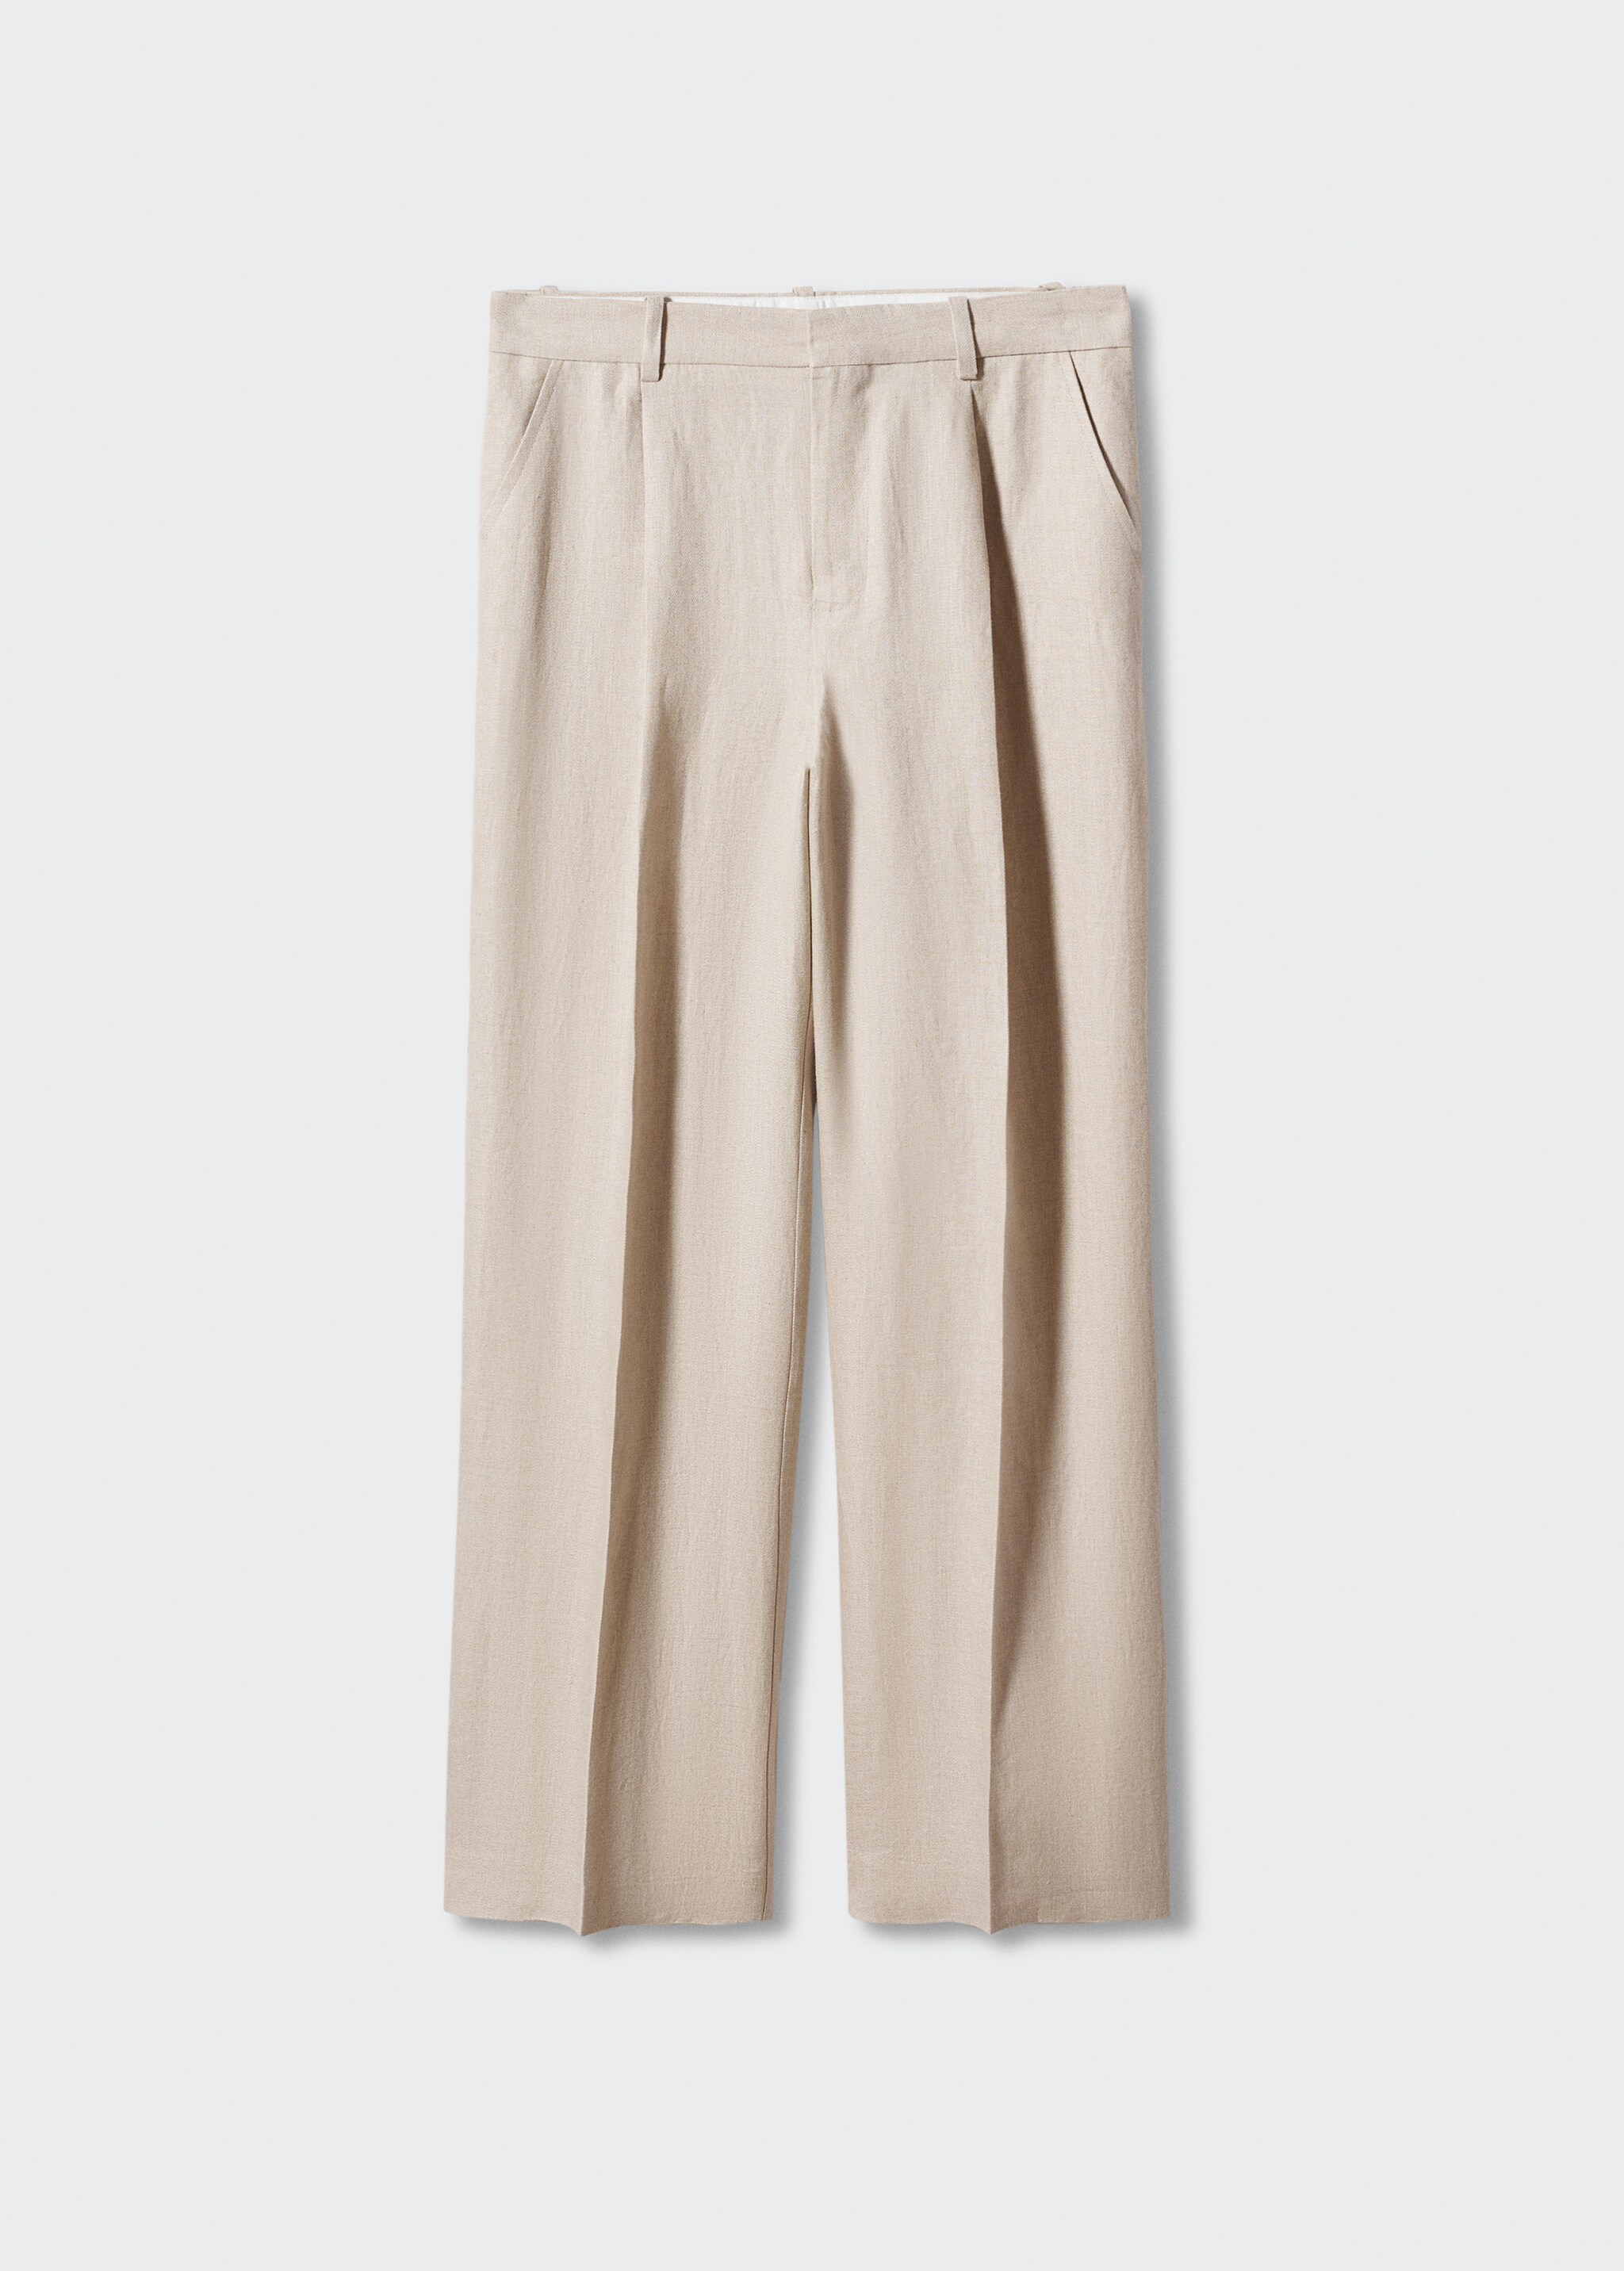 Linen suit trousers - Article without model